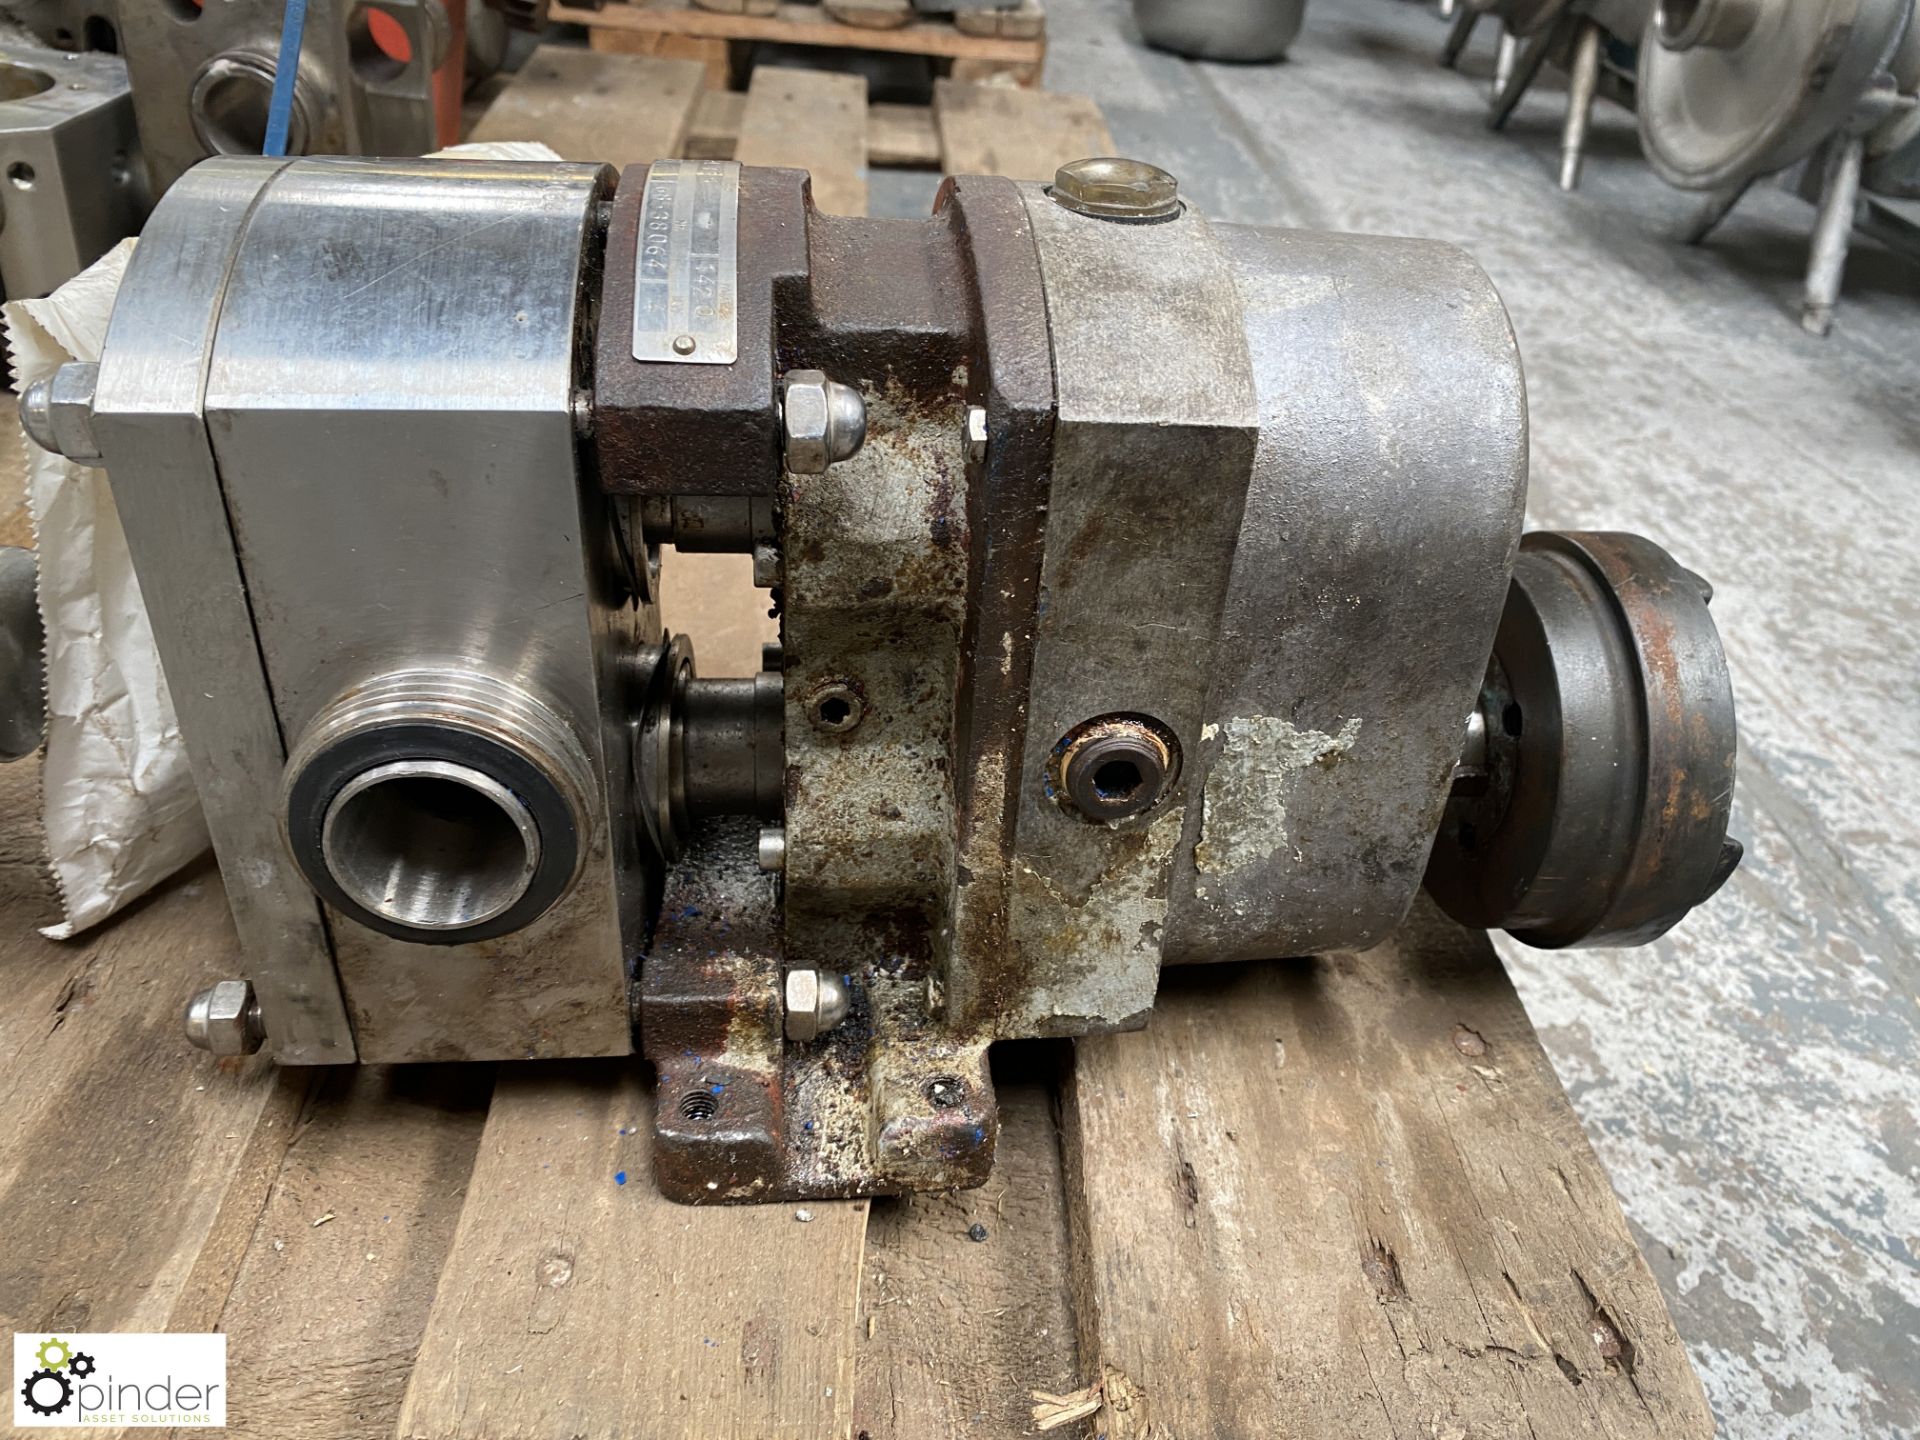 5 various stainless steel Lobe Pumps and 2 stainless steel Pump Heads, to pallet (Location - Image 6 of 8